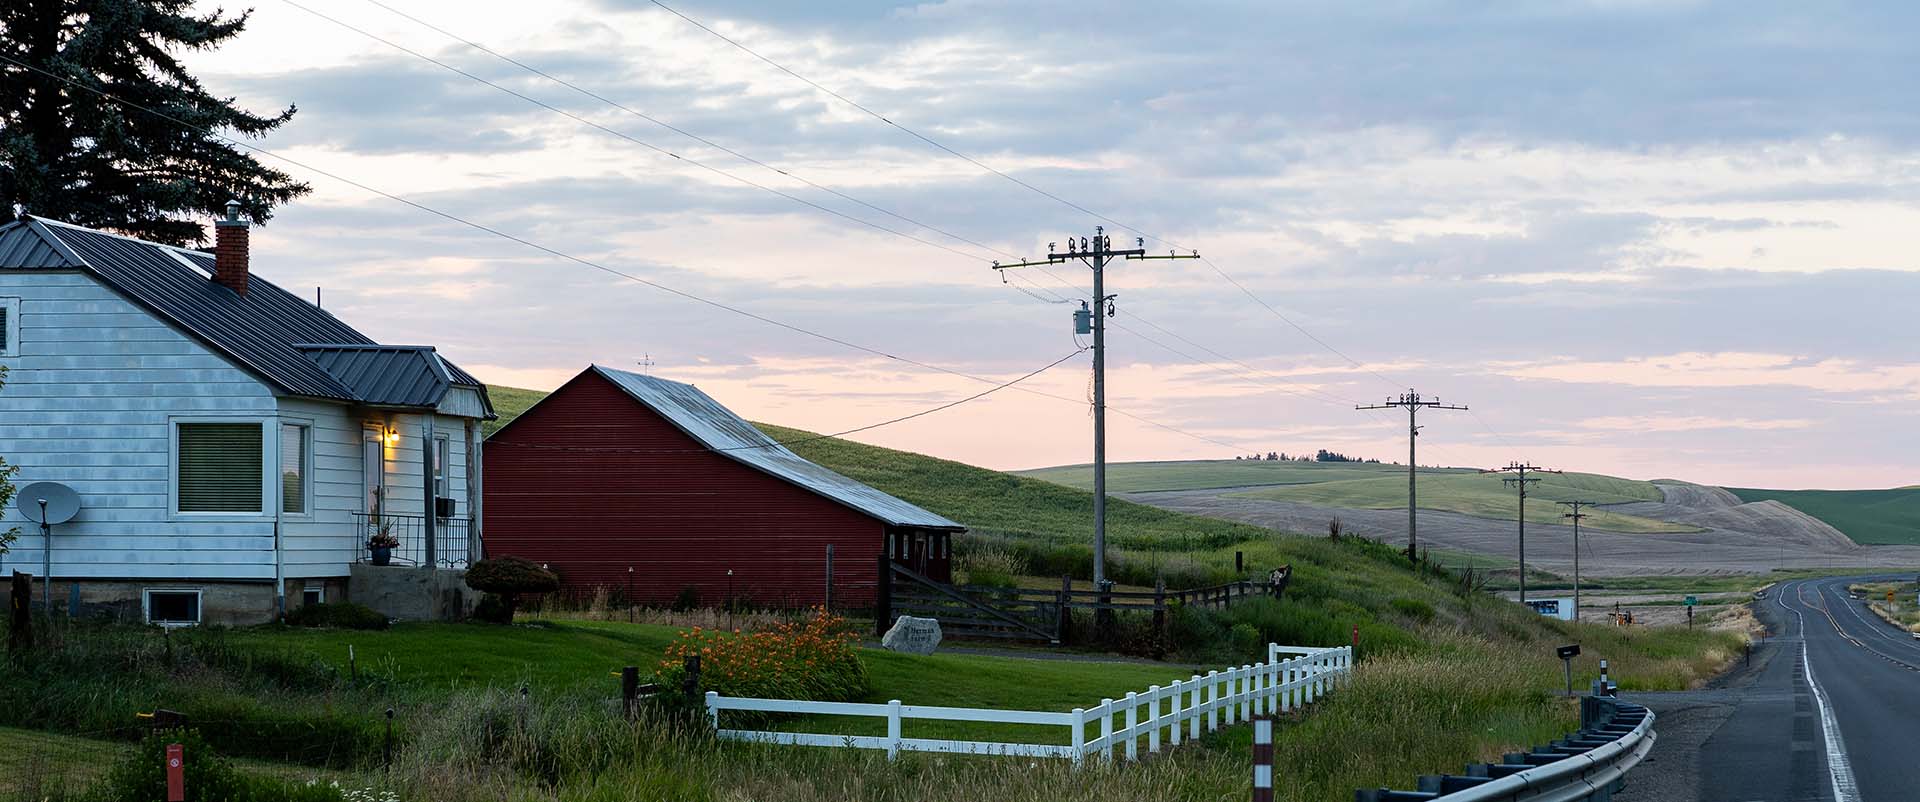 Photo of house and barn on gently rolling hills where residents often experience the digital divide 